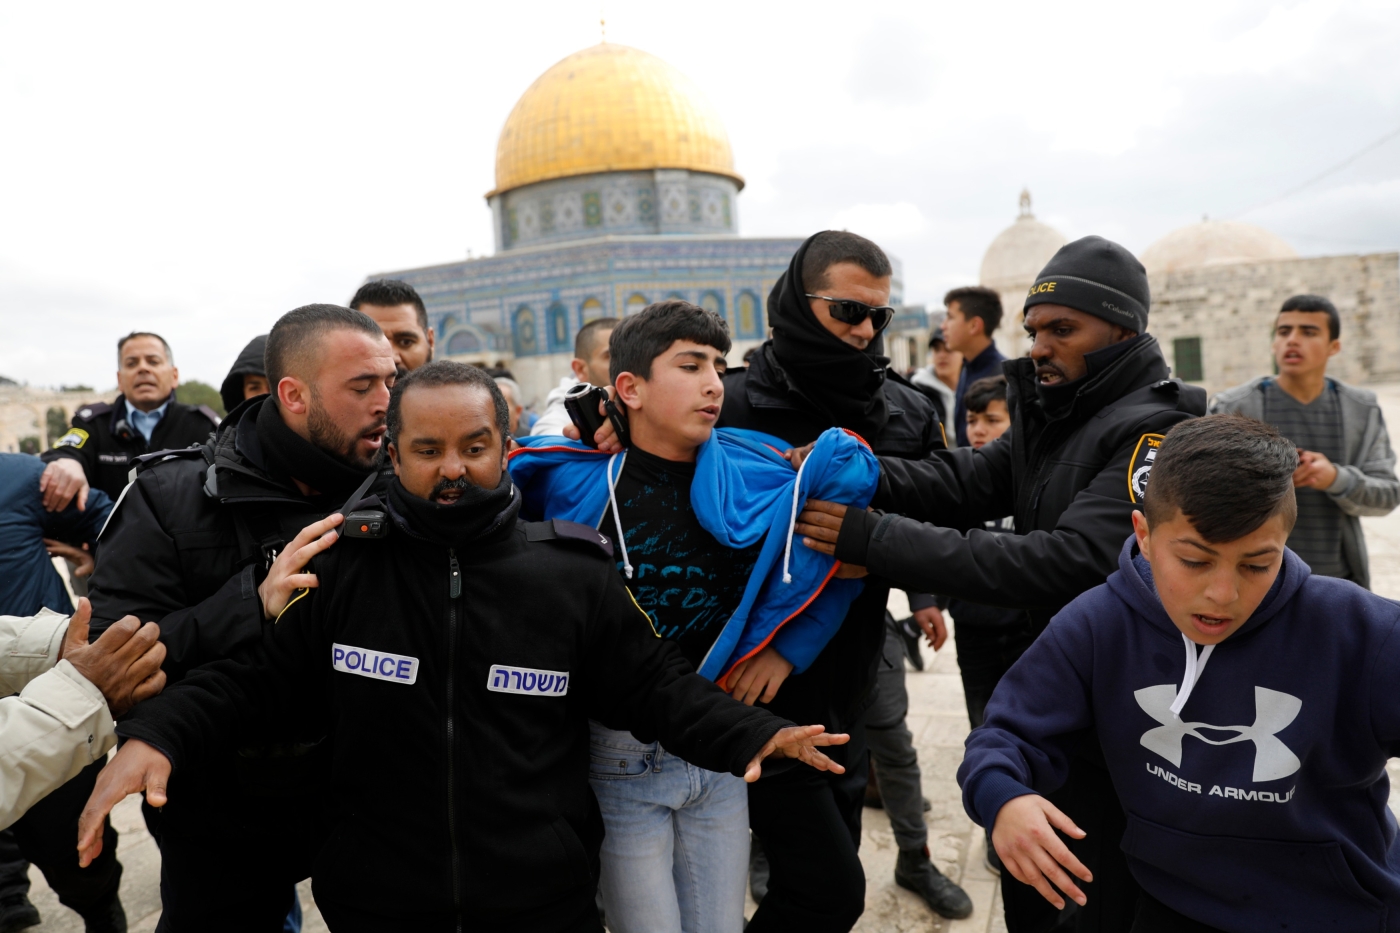 Israeli policemen detain a young Palestinian demonstrator after protesters tried to break the lock on a gate at the al-Aqsa mosque compound in Jerusalem's Old City on 18 February 2019 (AFP)